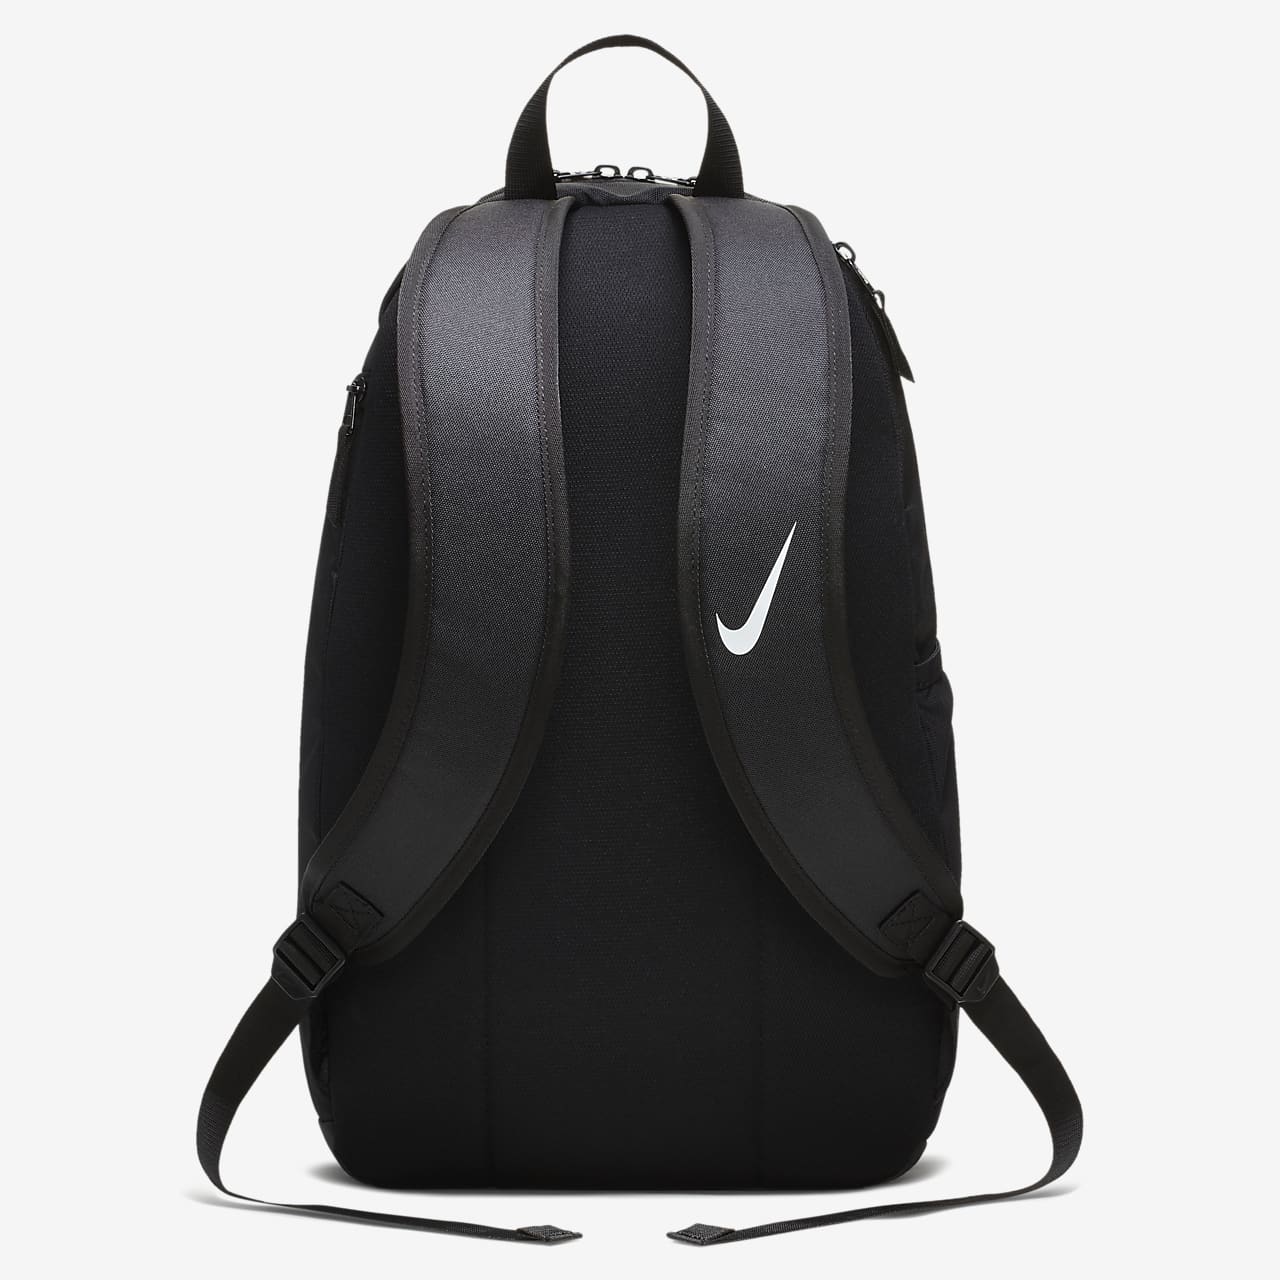 Nike Academy Backpack Size France, SAVE - aveclumiere.com